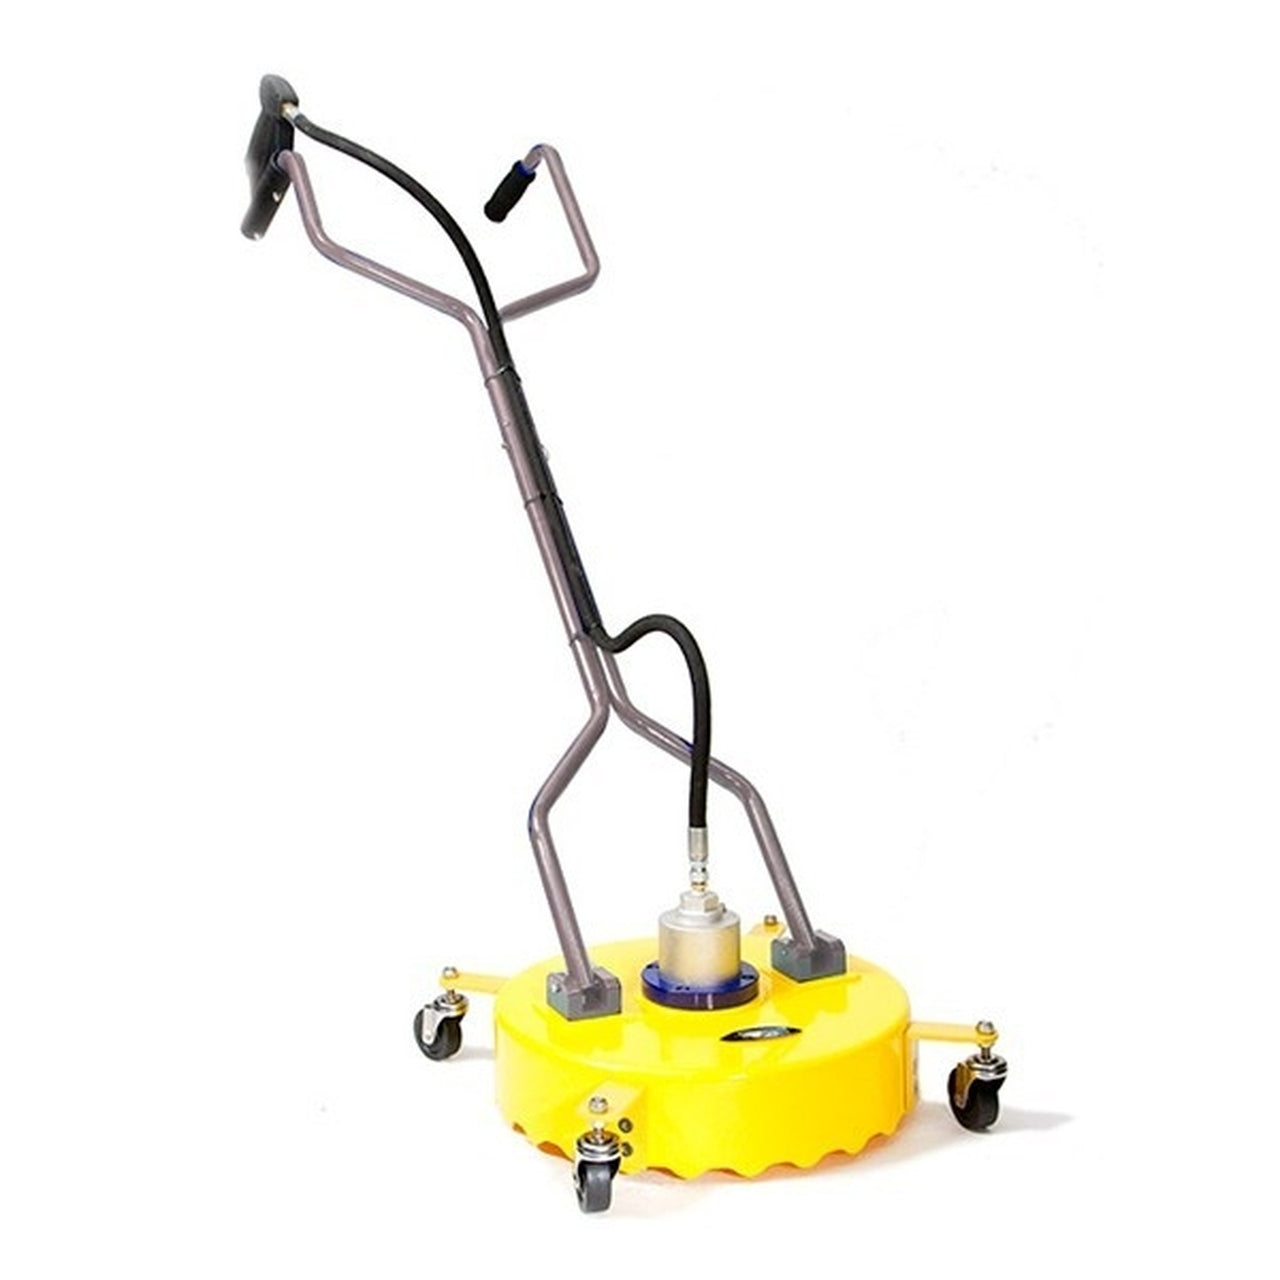 BE 85.403.005 Pressure Whirlaway 18" Rotary Flat Surface Cleaner by Hyundai